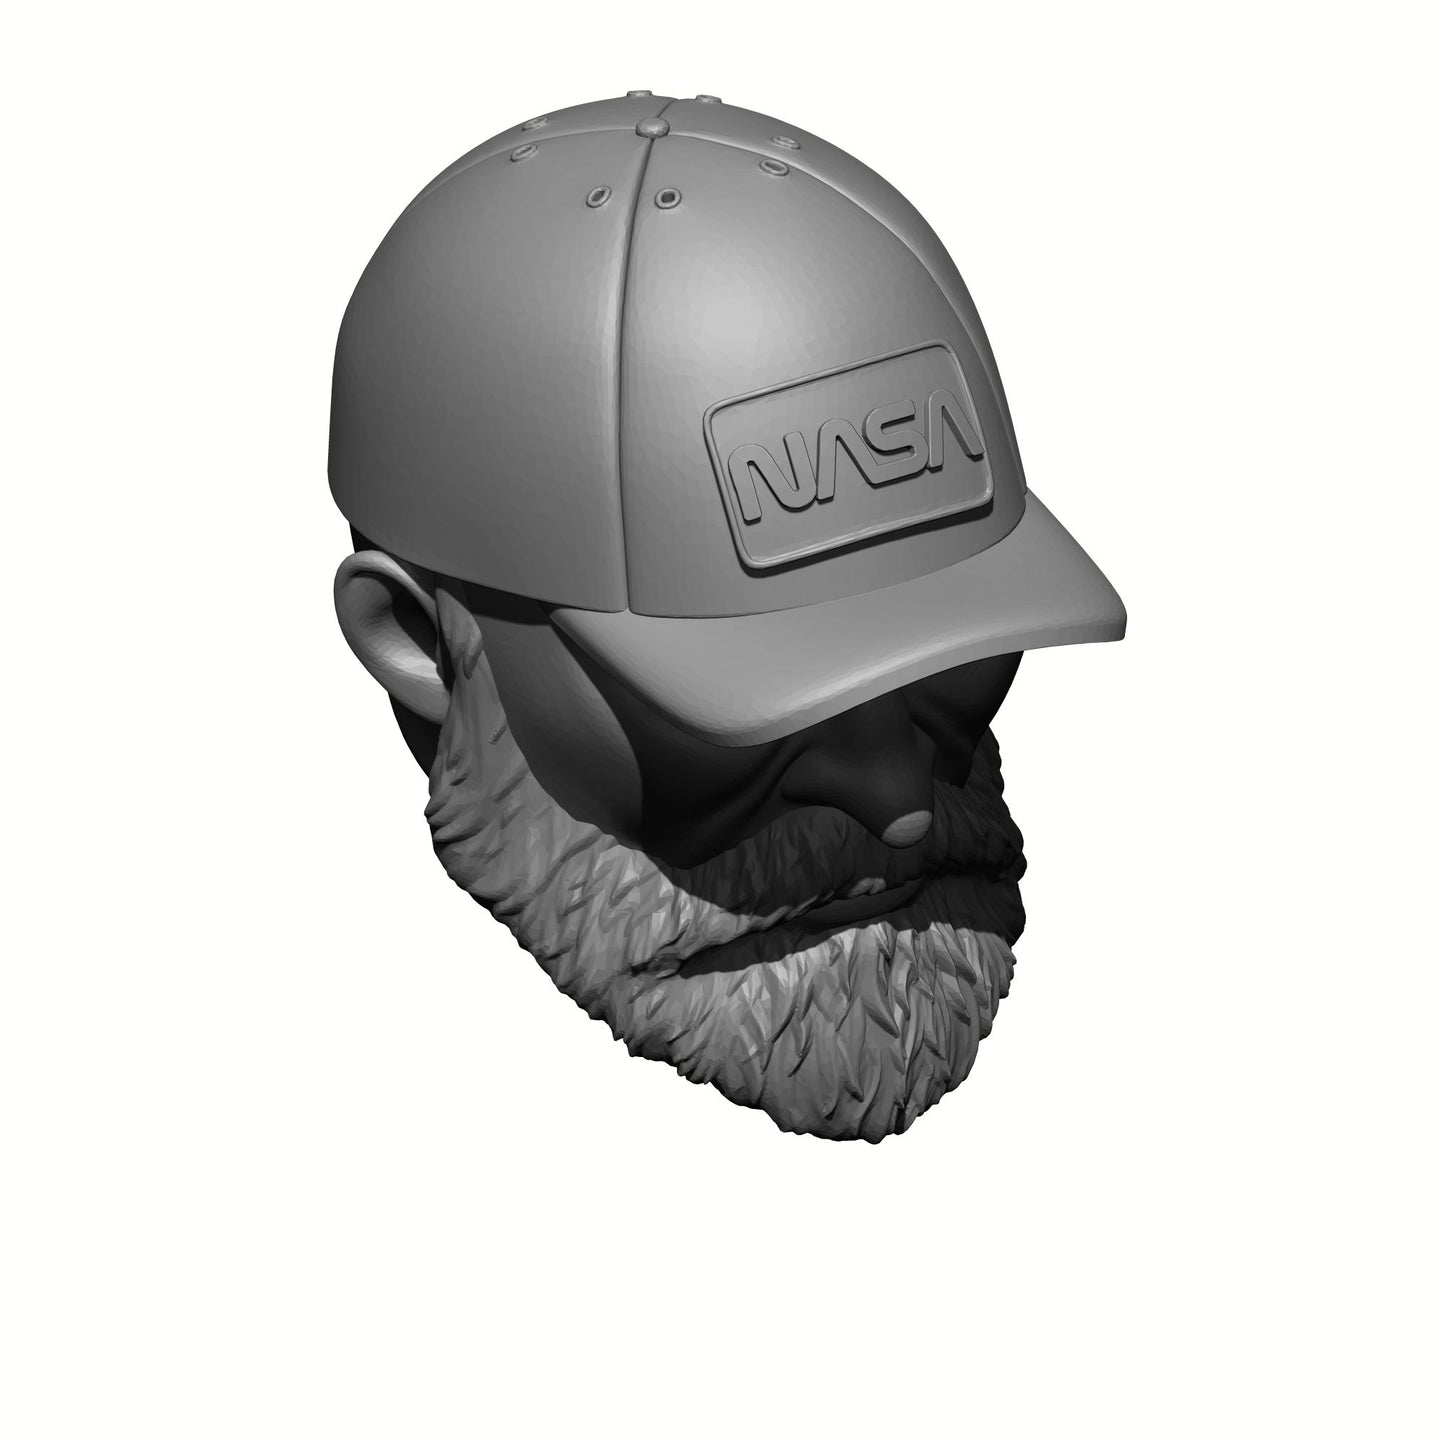 Top of the Custom G.I. Joe Classified 6-inch Scale Veteran with Beard and Hat with NASA Patch Head Swap by Fantasy World Games